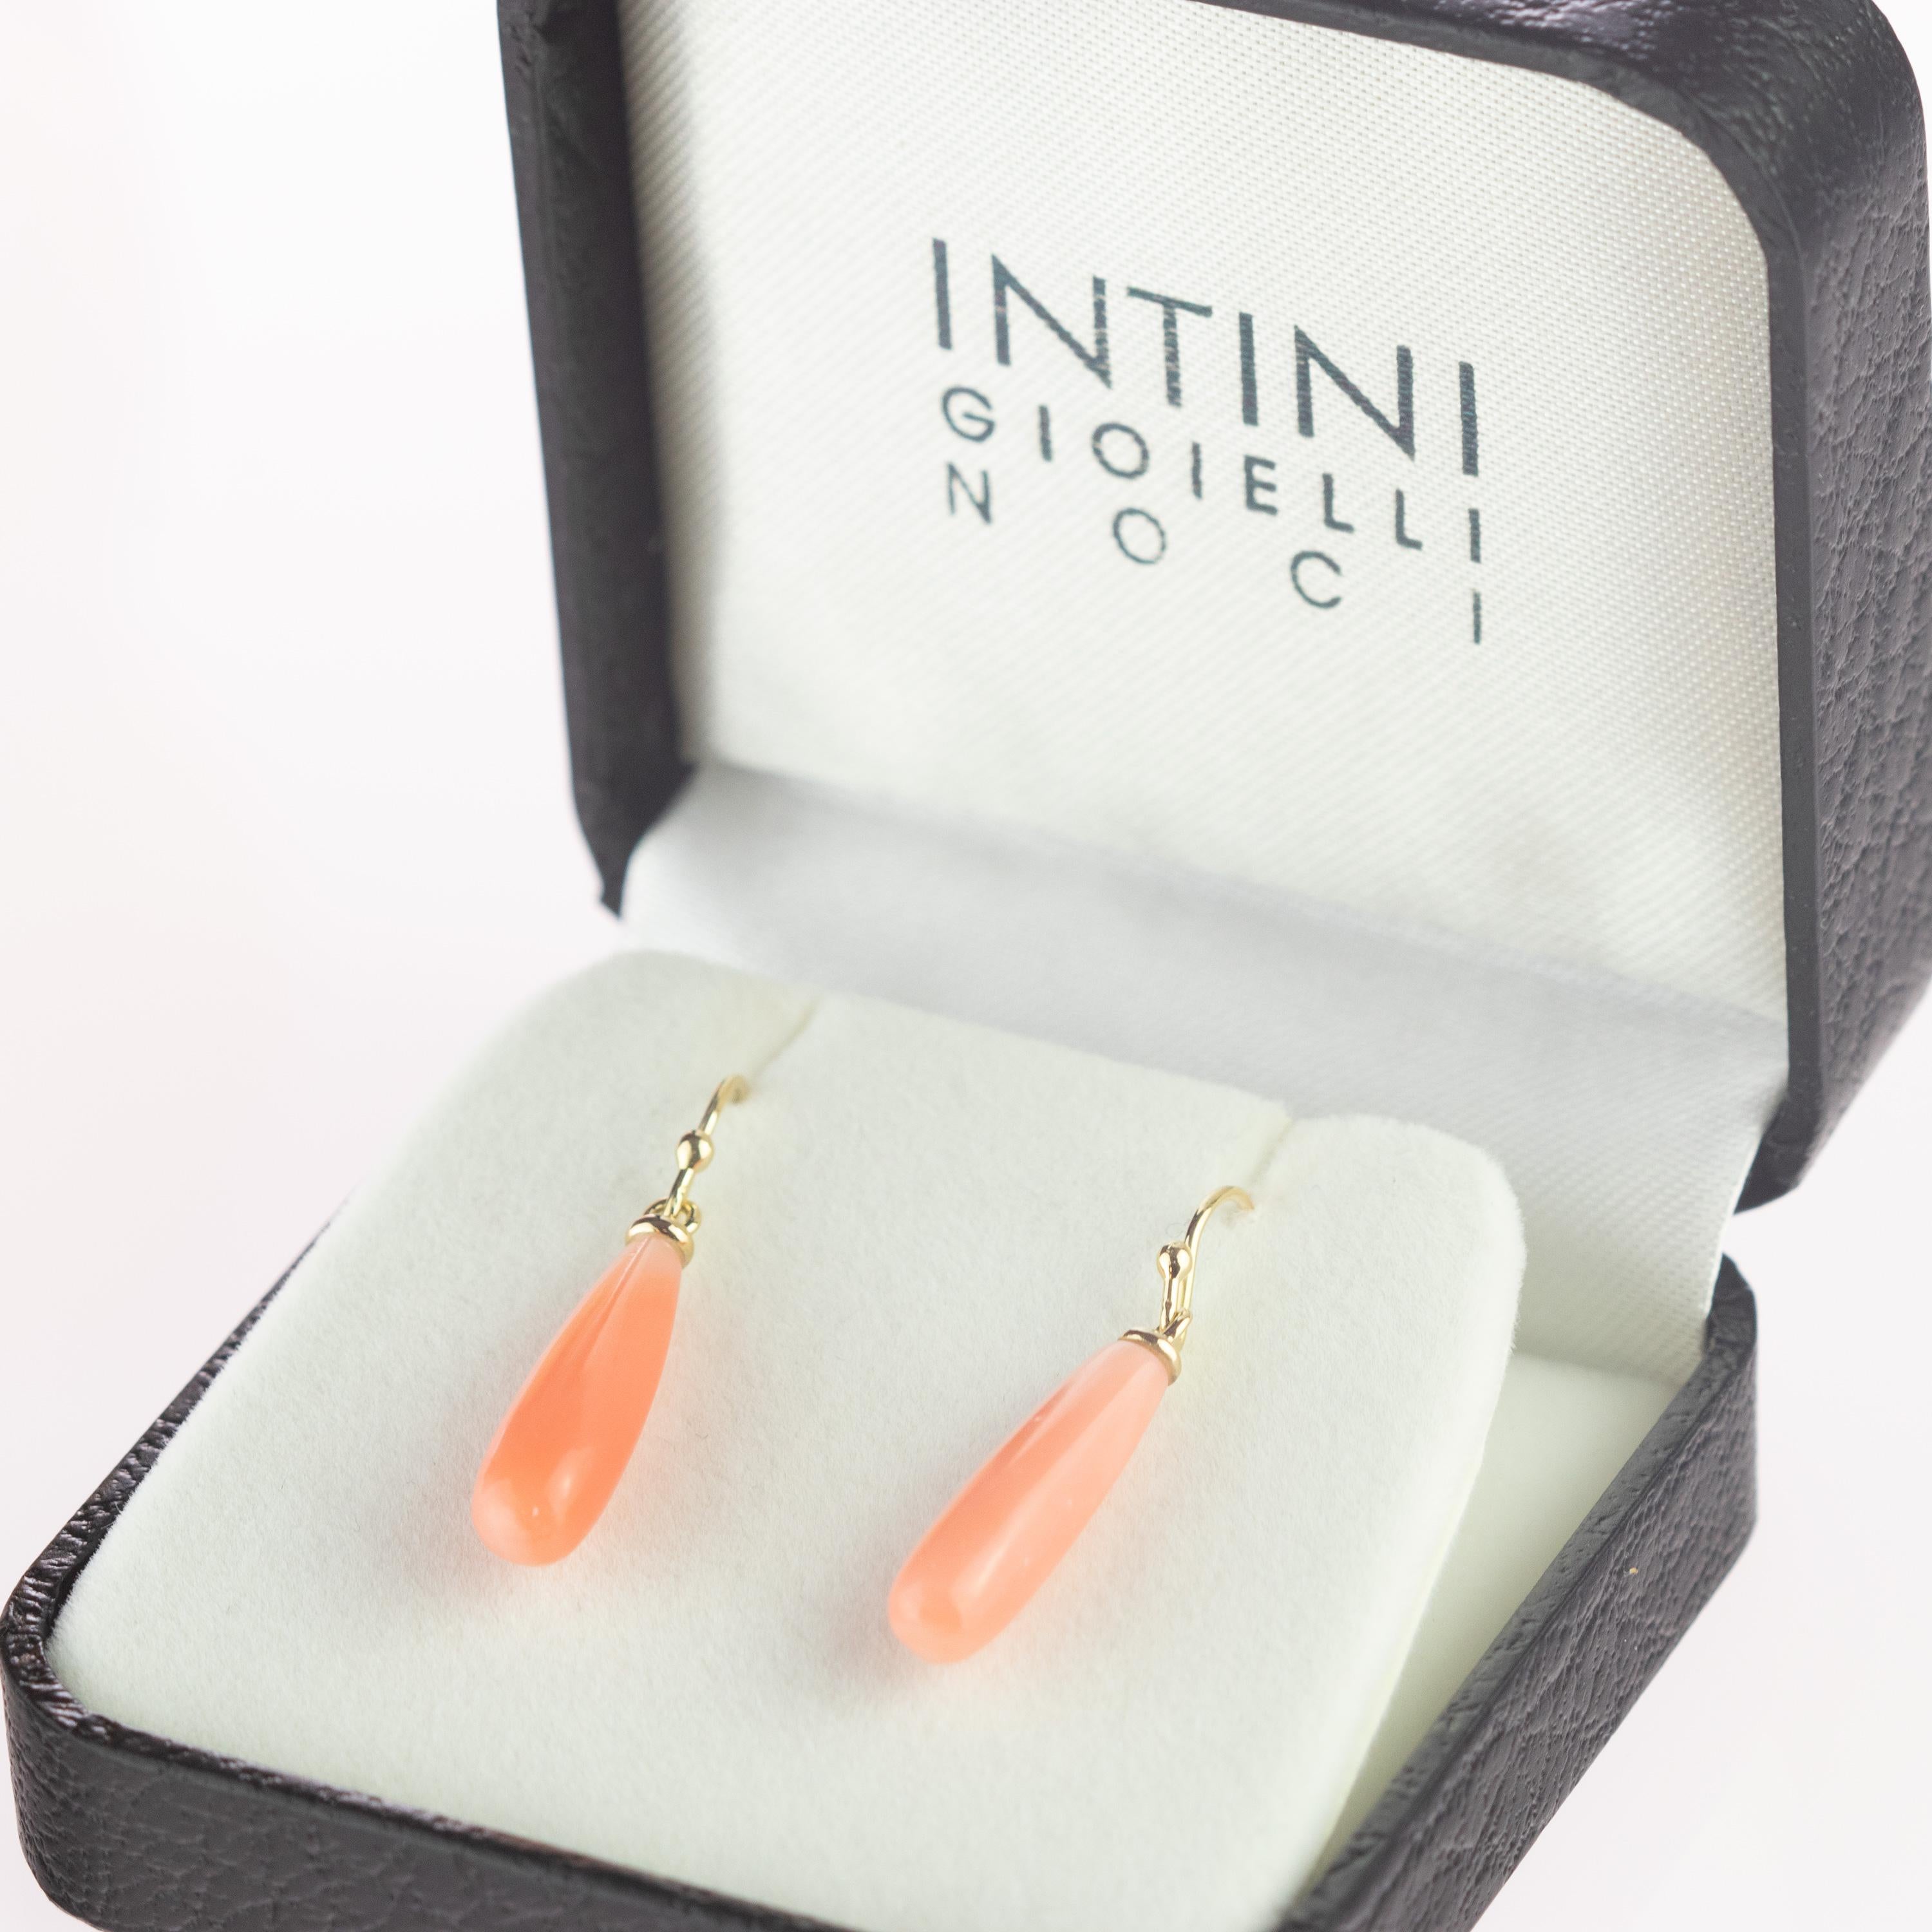 This stunning masterpiece with high quality craftsmanship was born in the Intini Jewels workshop. Our designers add all the italian modern style and glamour in one exquisite piece. Stunning crafted 12.5 carat coral coral drops, hanging from 18 karat